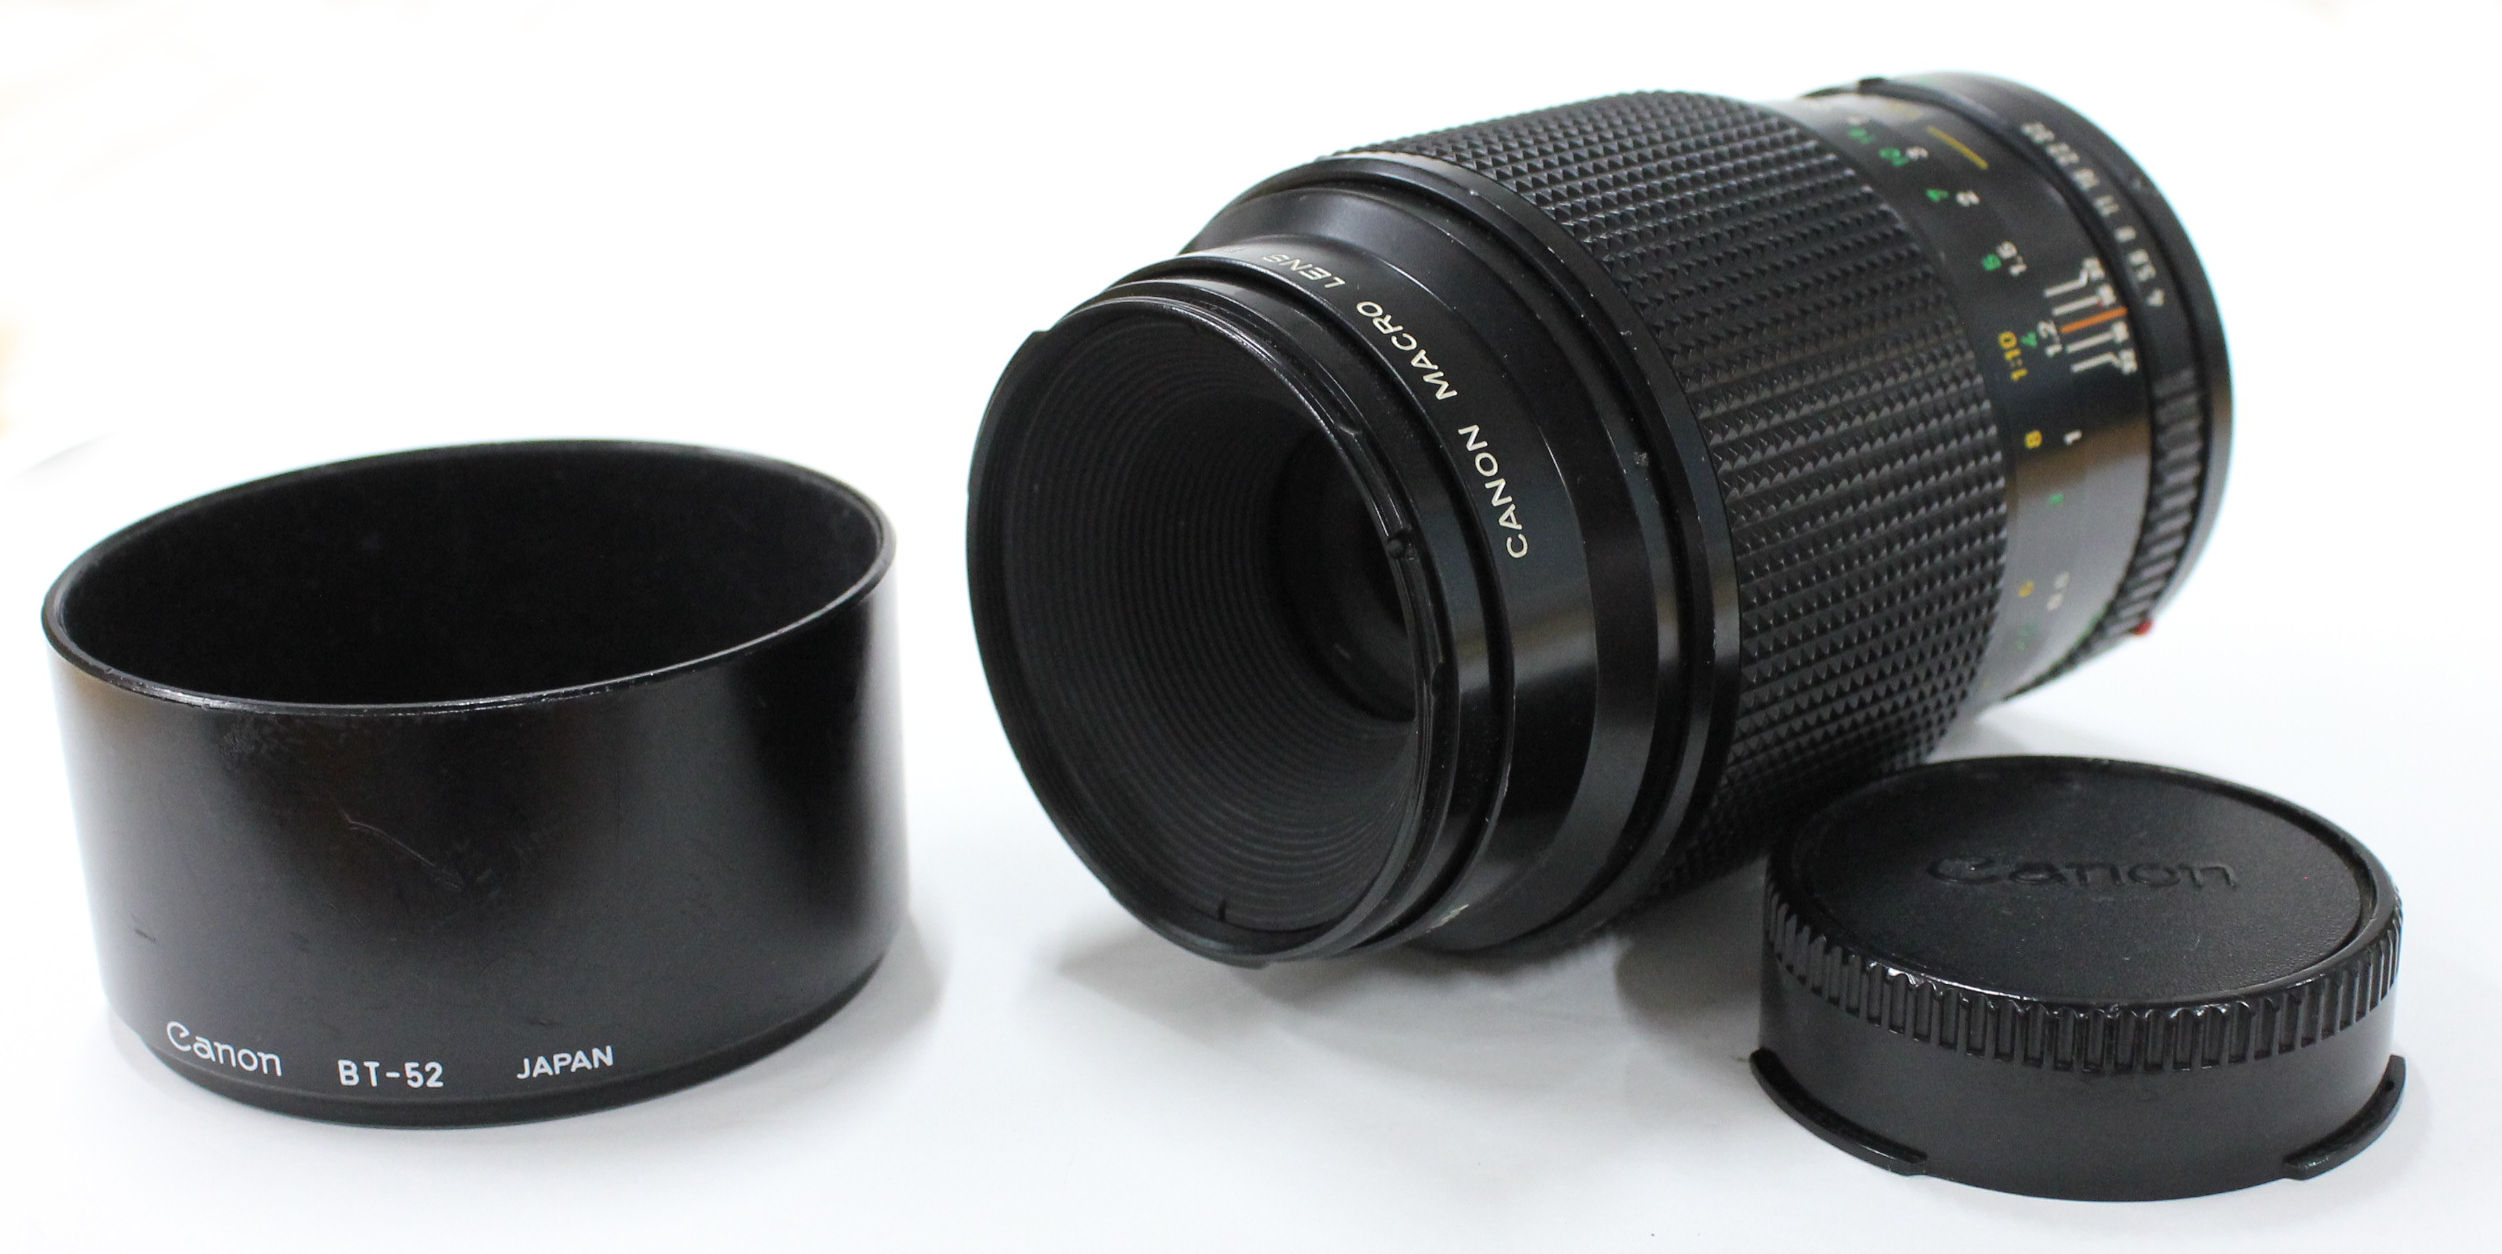 Japan Used Camera Shop | [Excellent+++++] CANON New FD 100mm F/4 Macro Lens with Hood from Japan